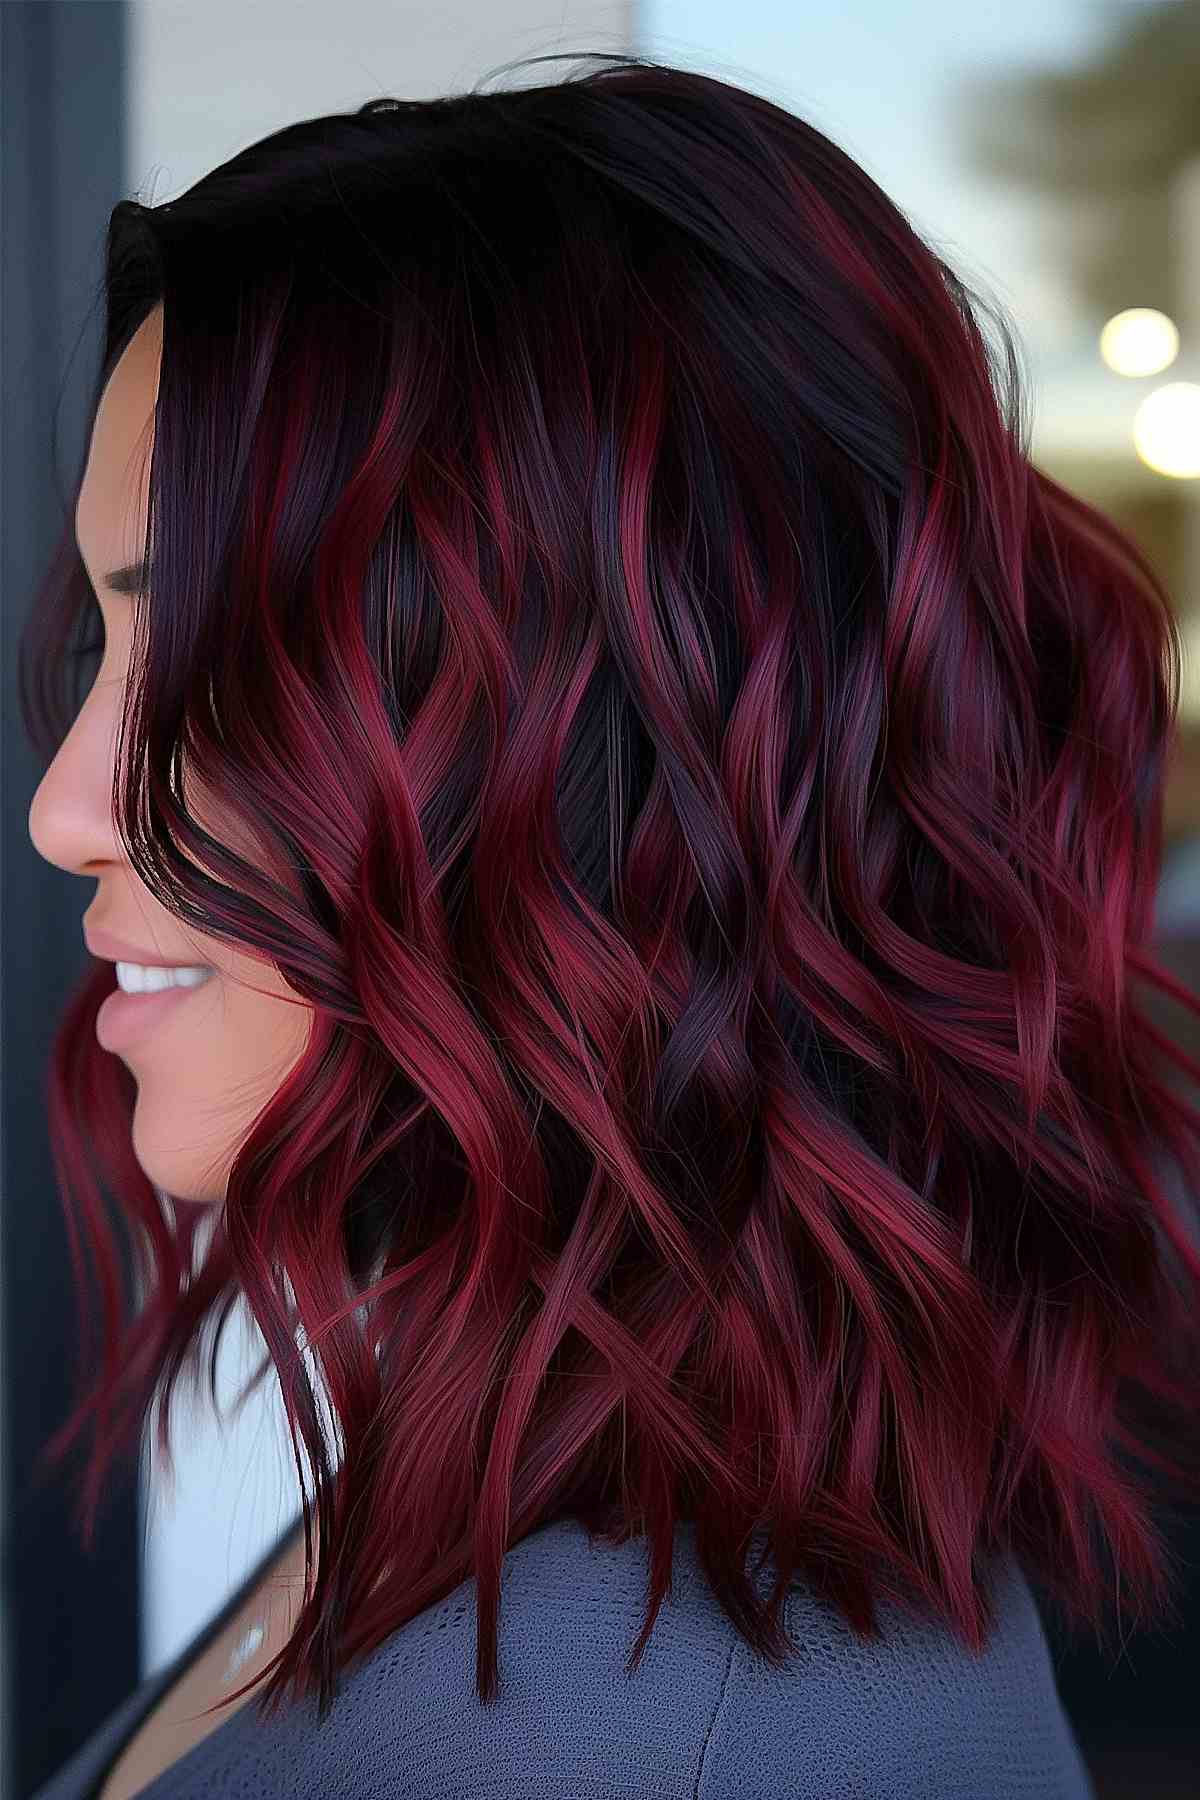 Cherry red hair with dark roots for an edgy, low-maintenance look.